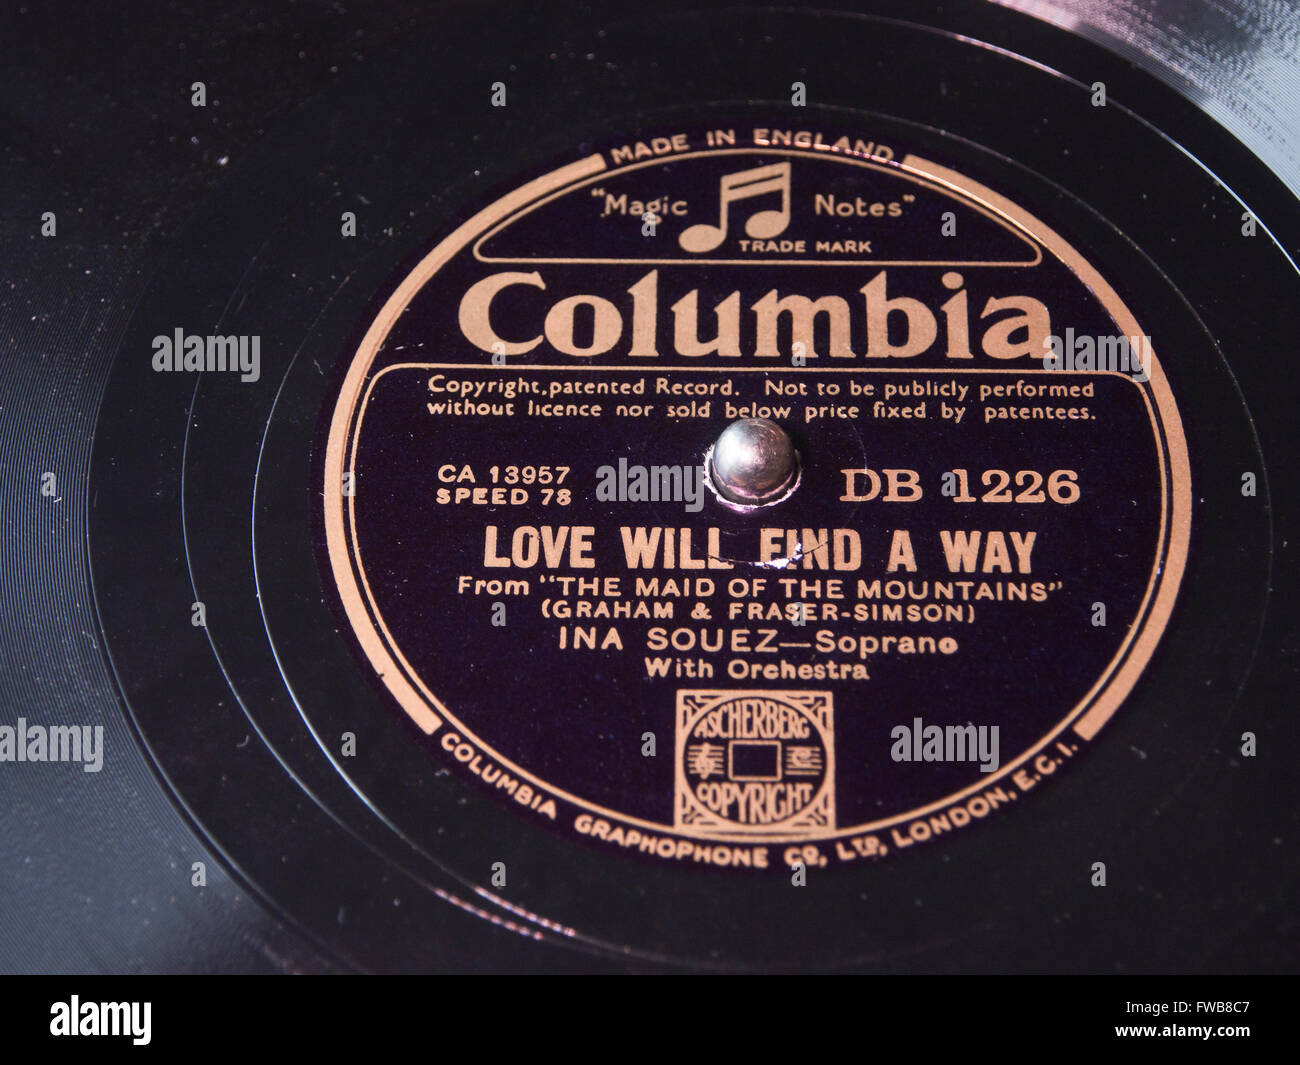 Vintage recording with singer Ina Souez 'Love will find a way'on the Coloumbia record label, 1933 Stock Photo